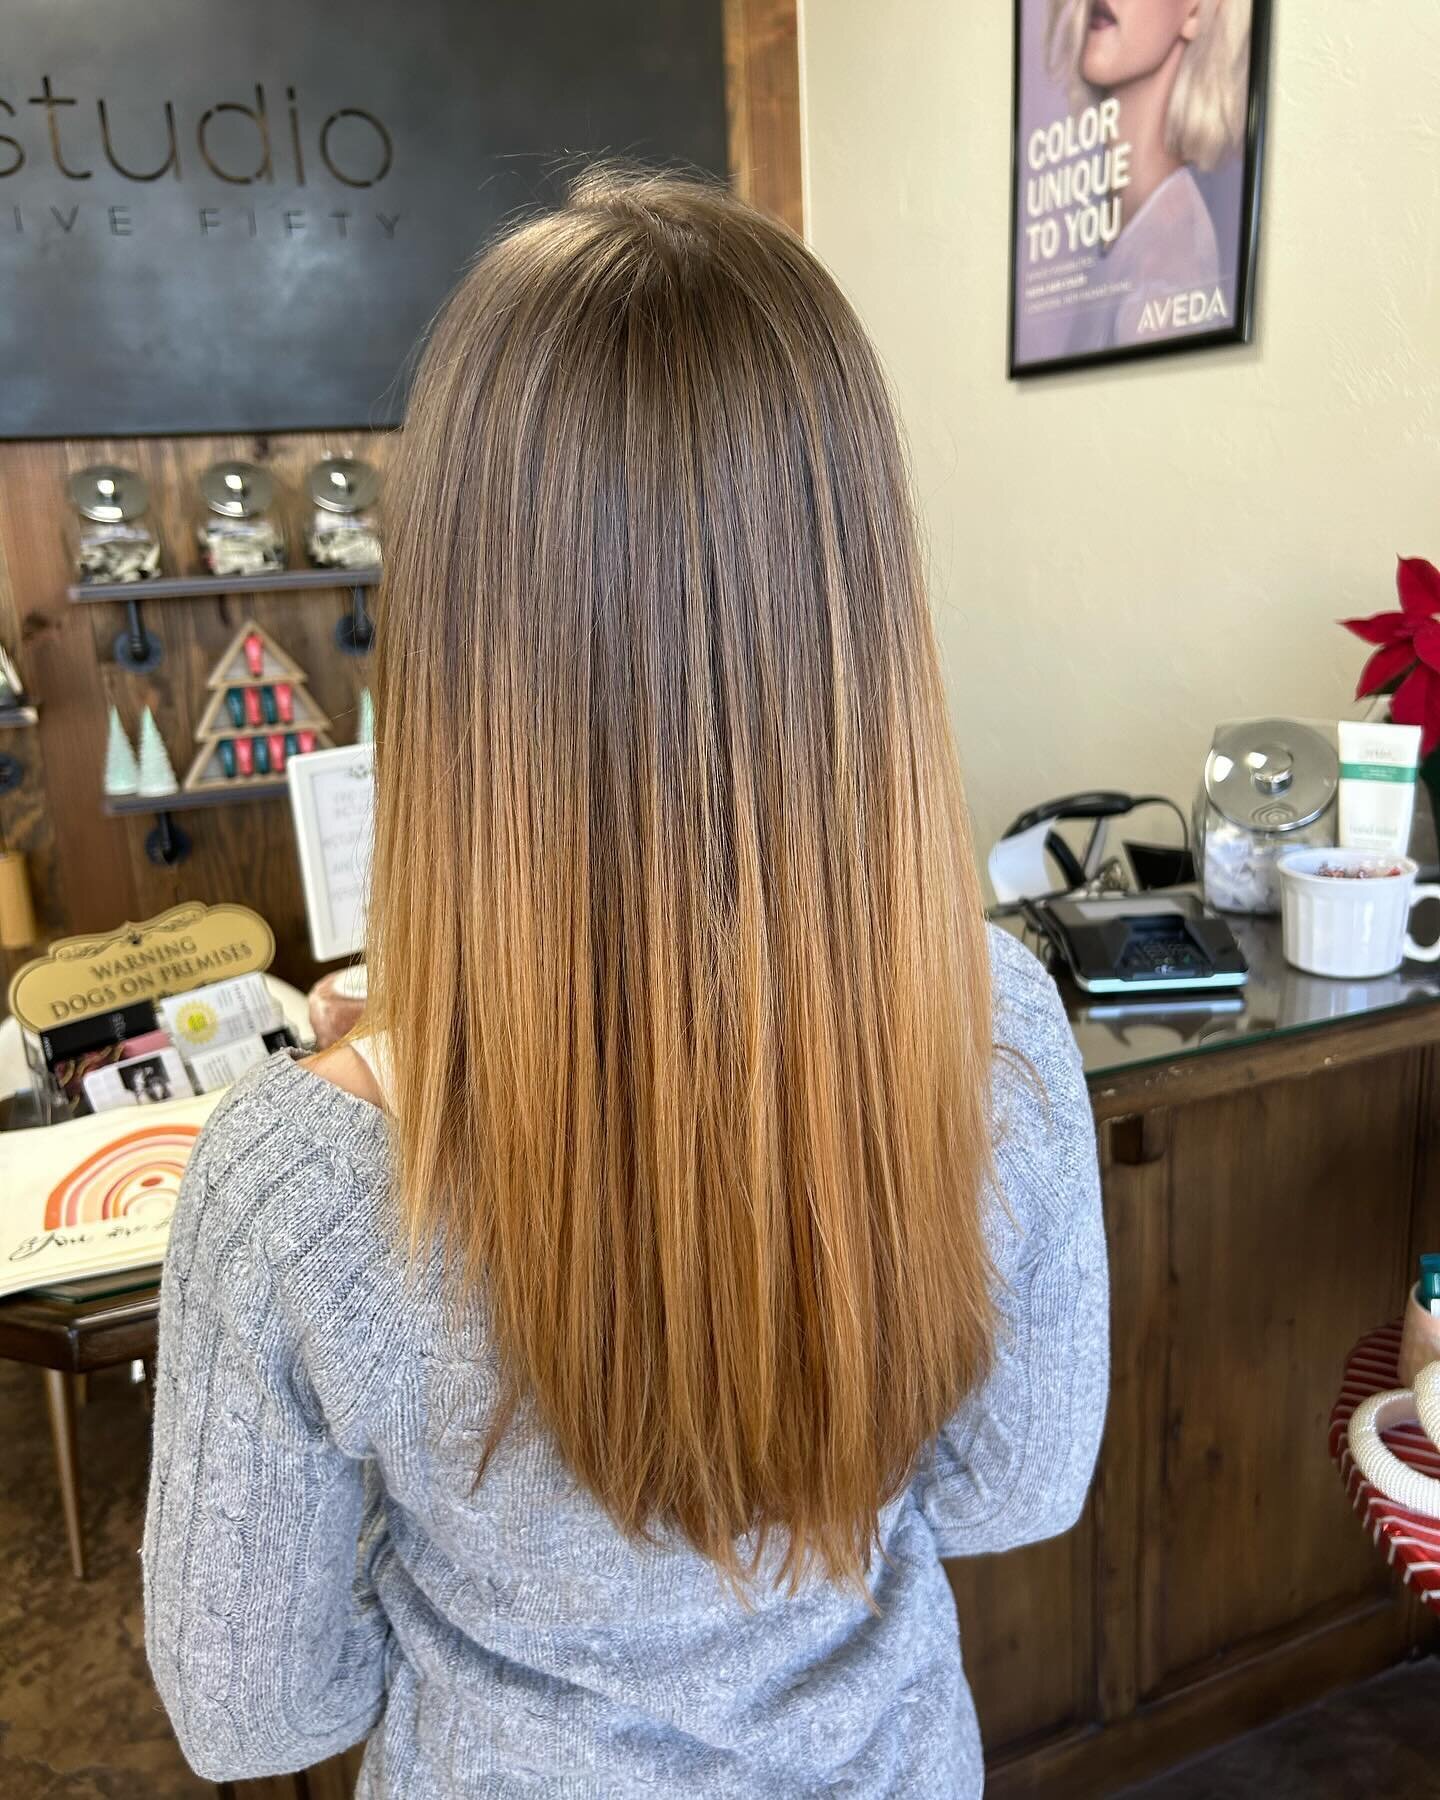 We love a good haircut 🤩 Swipe to see the before 🫢

2024 is almost here...so come in to start the new year right with a fresh haircut!!! 🥂✨

#utahhairstylist #utahhairsalon #heberstylist #hebercityutah #hairstylist #haircut #chop #avedasalon #aved